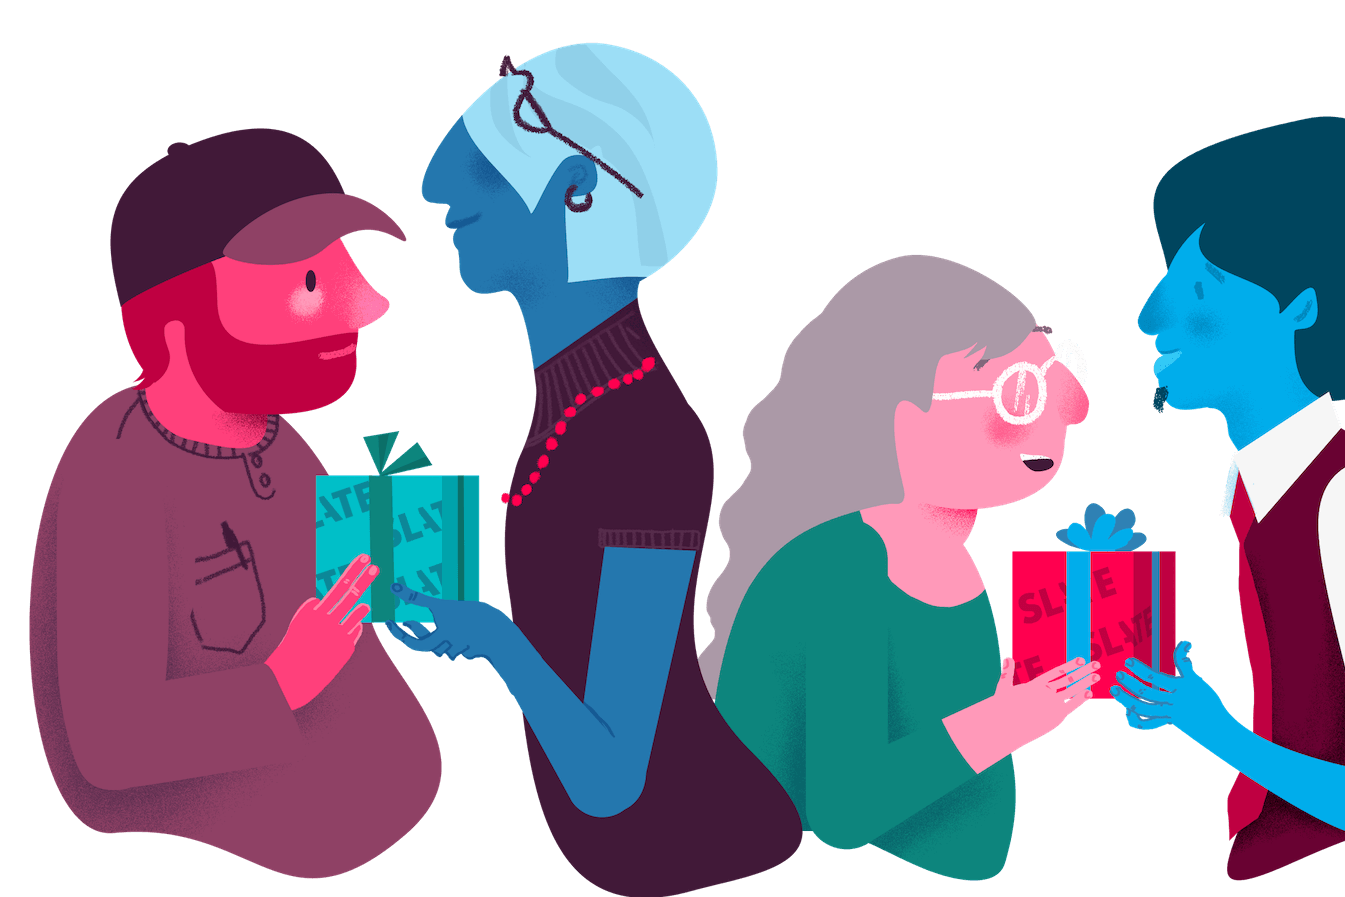 An illustration of colorful people sharing gifts.